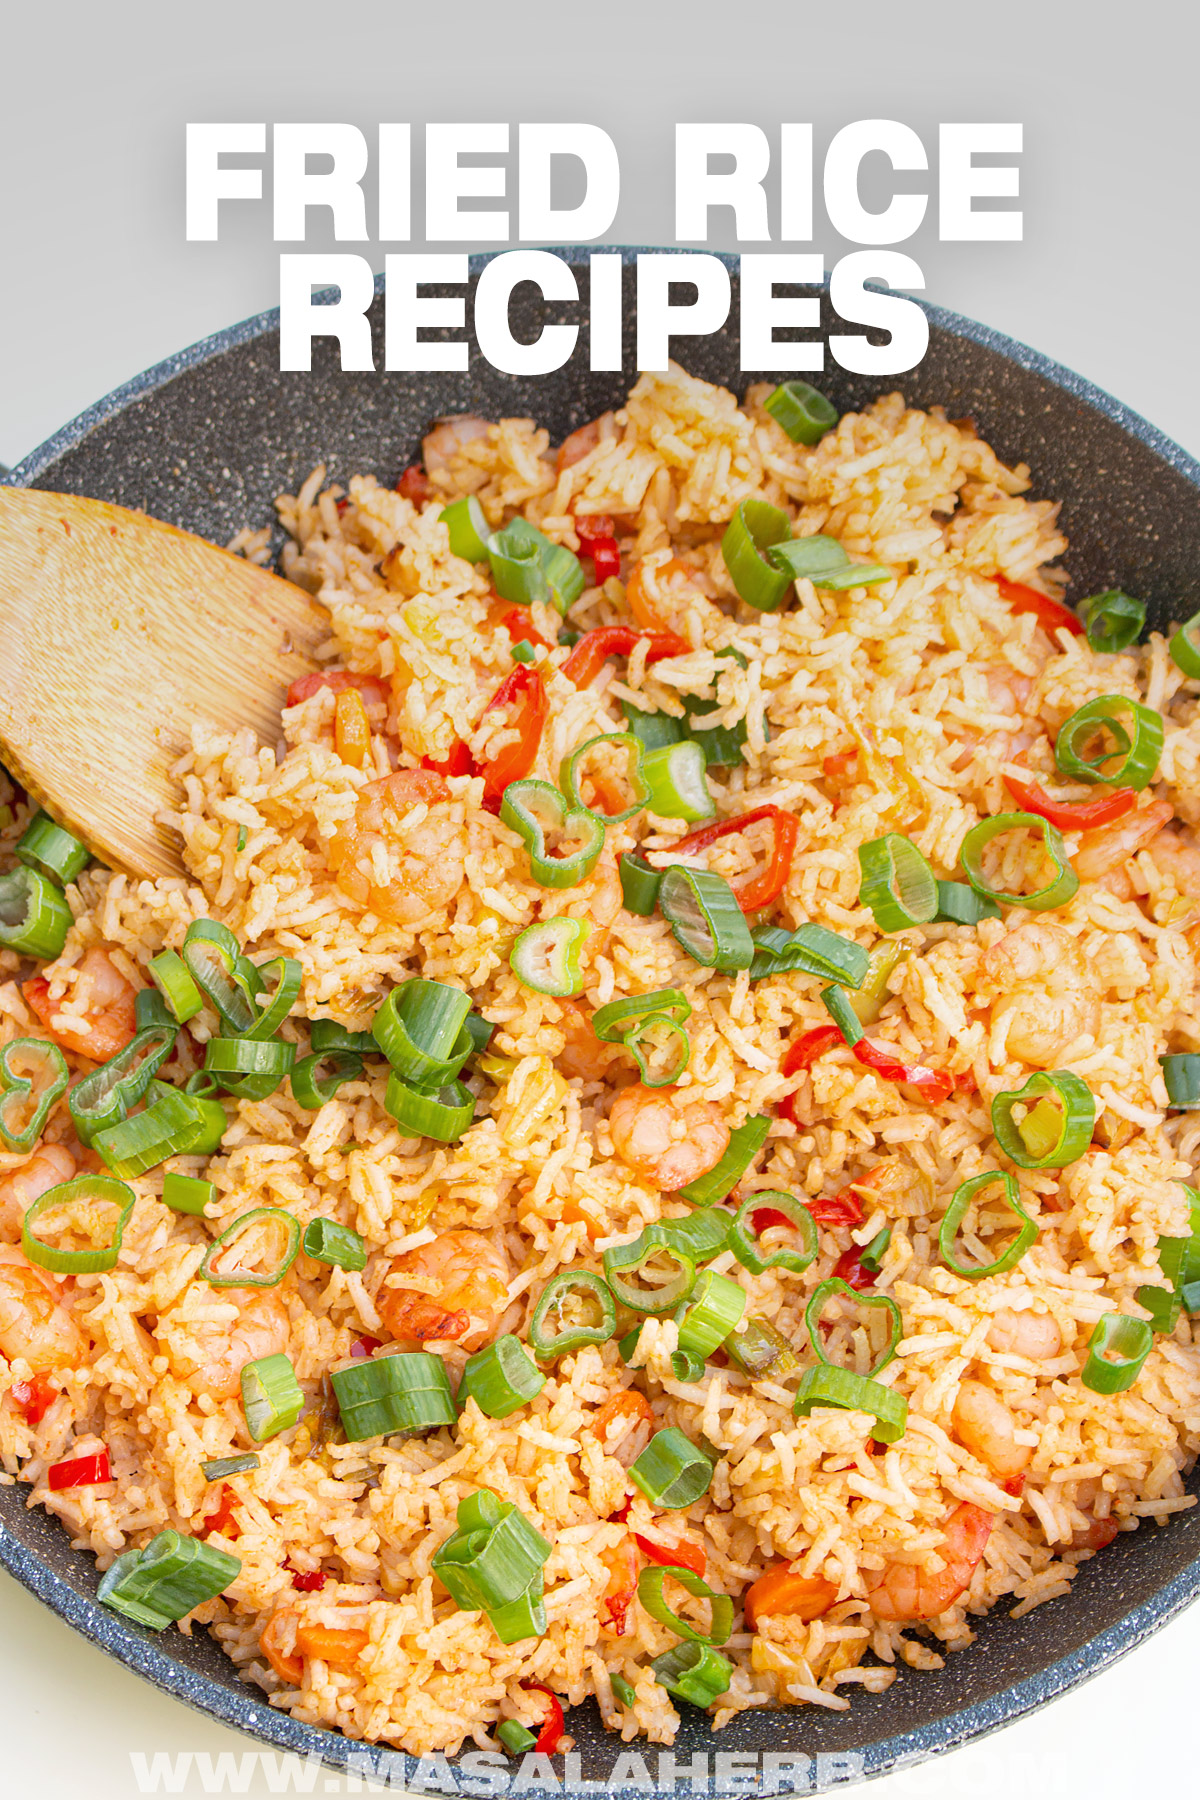 7 BEST Fried Rice Recipes pin image